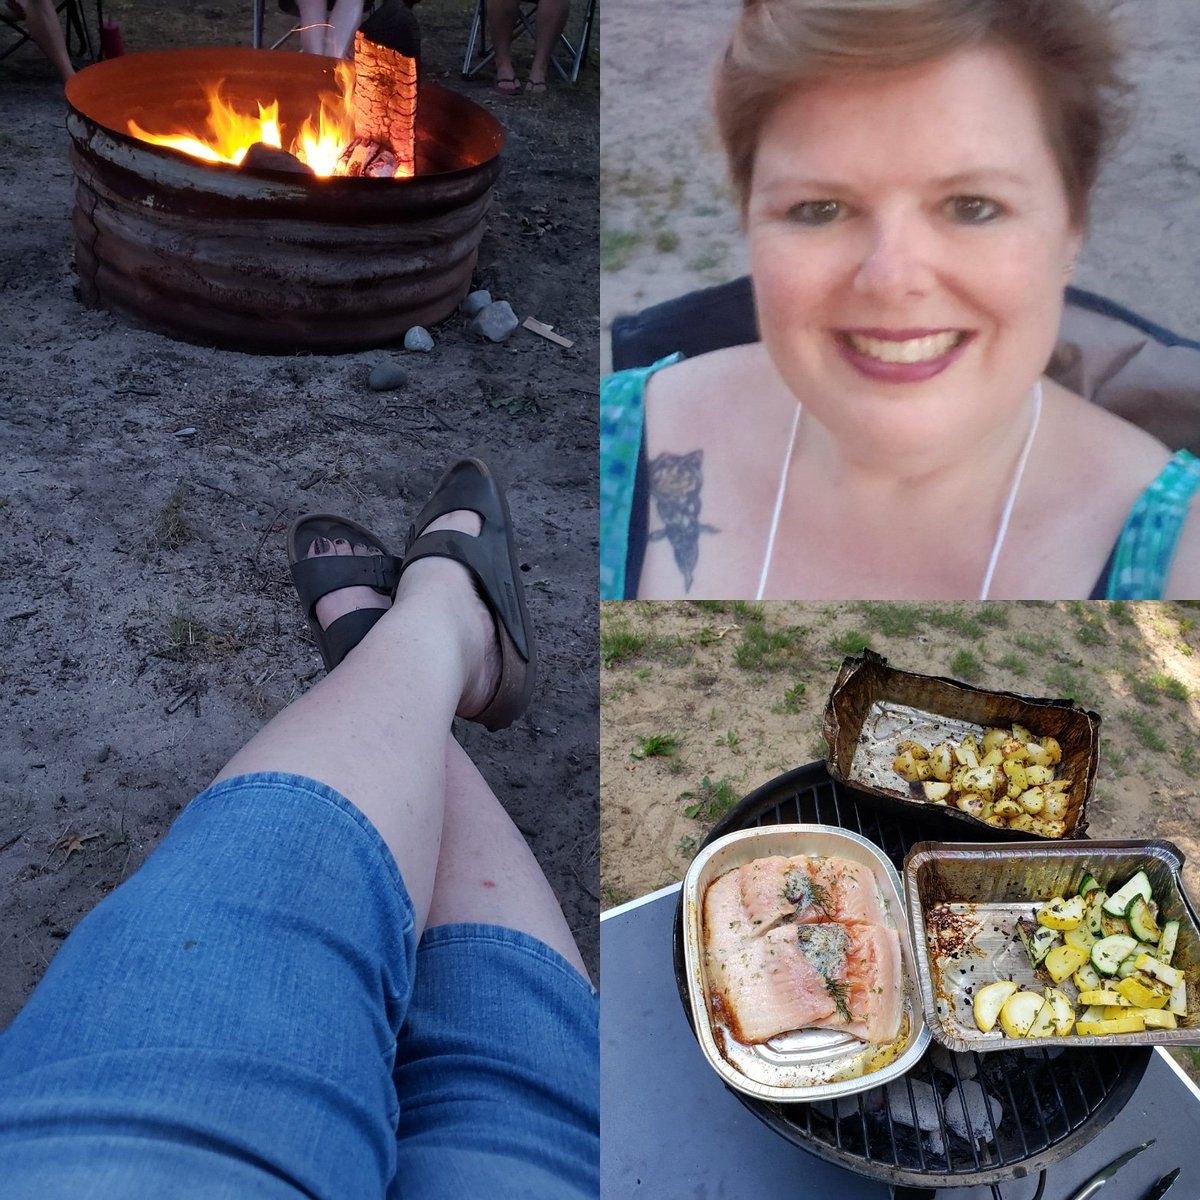 Just because you are single, doesn't mean you can't enjoy camping! I am enjoying a fun, relaxing time camping with friends. So excited to learn I can put my tent up alone if needed! Even more excited that I didn't need to! YAY!! #DianeJrsJourney #SingleLife #CampingWithFriends